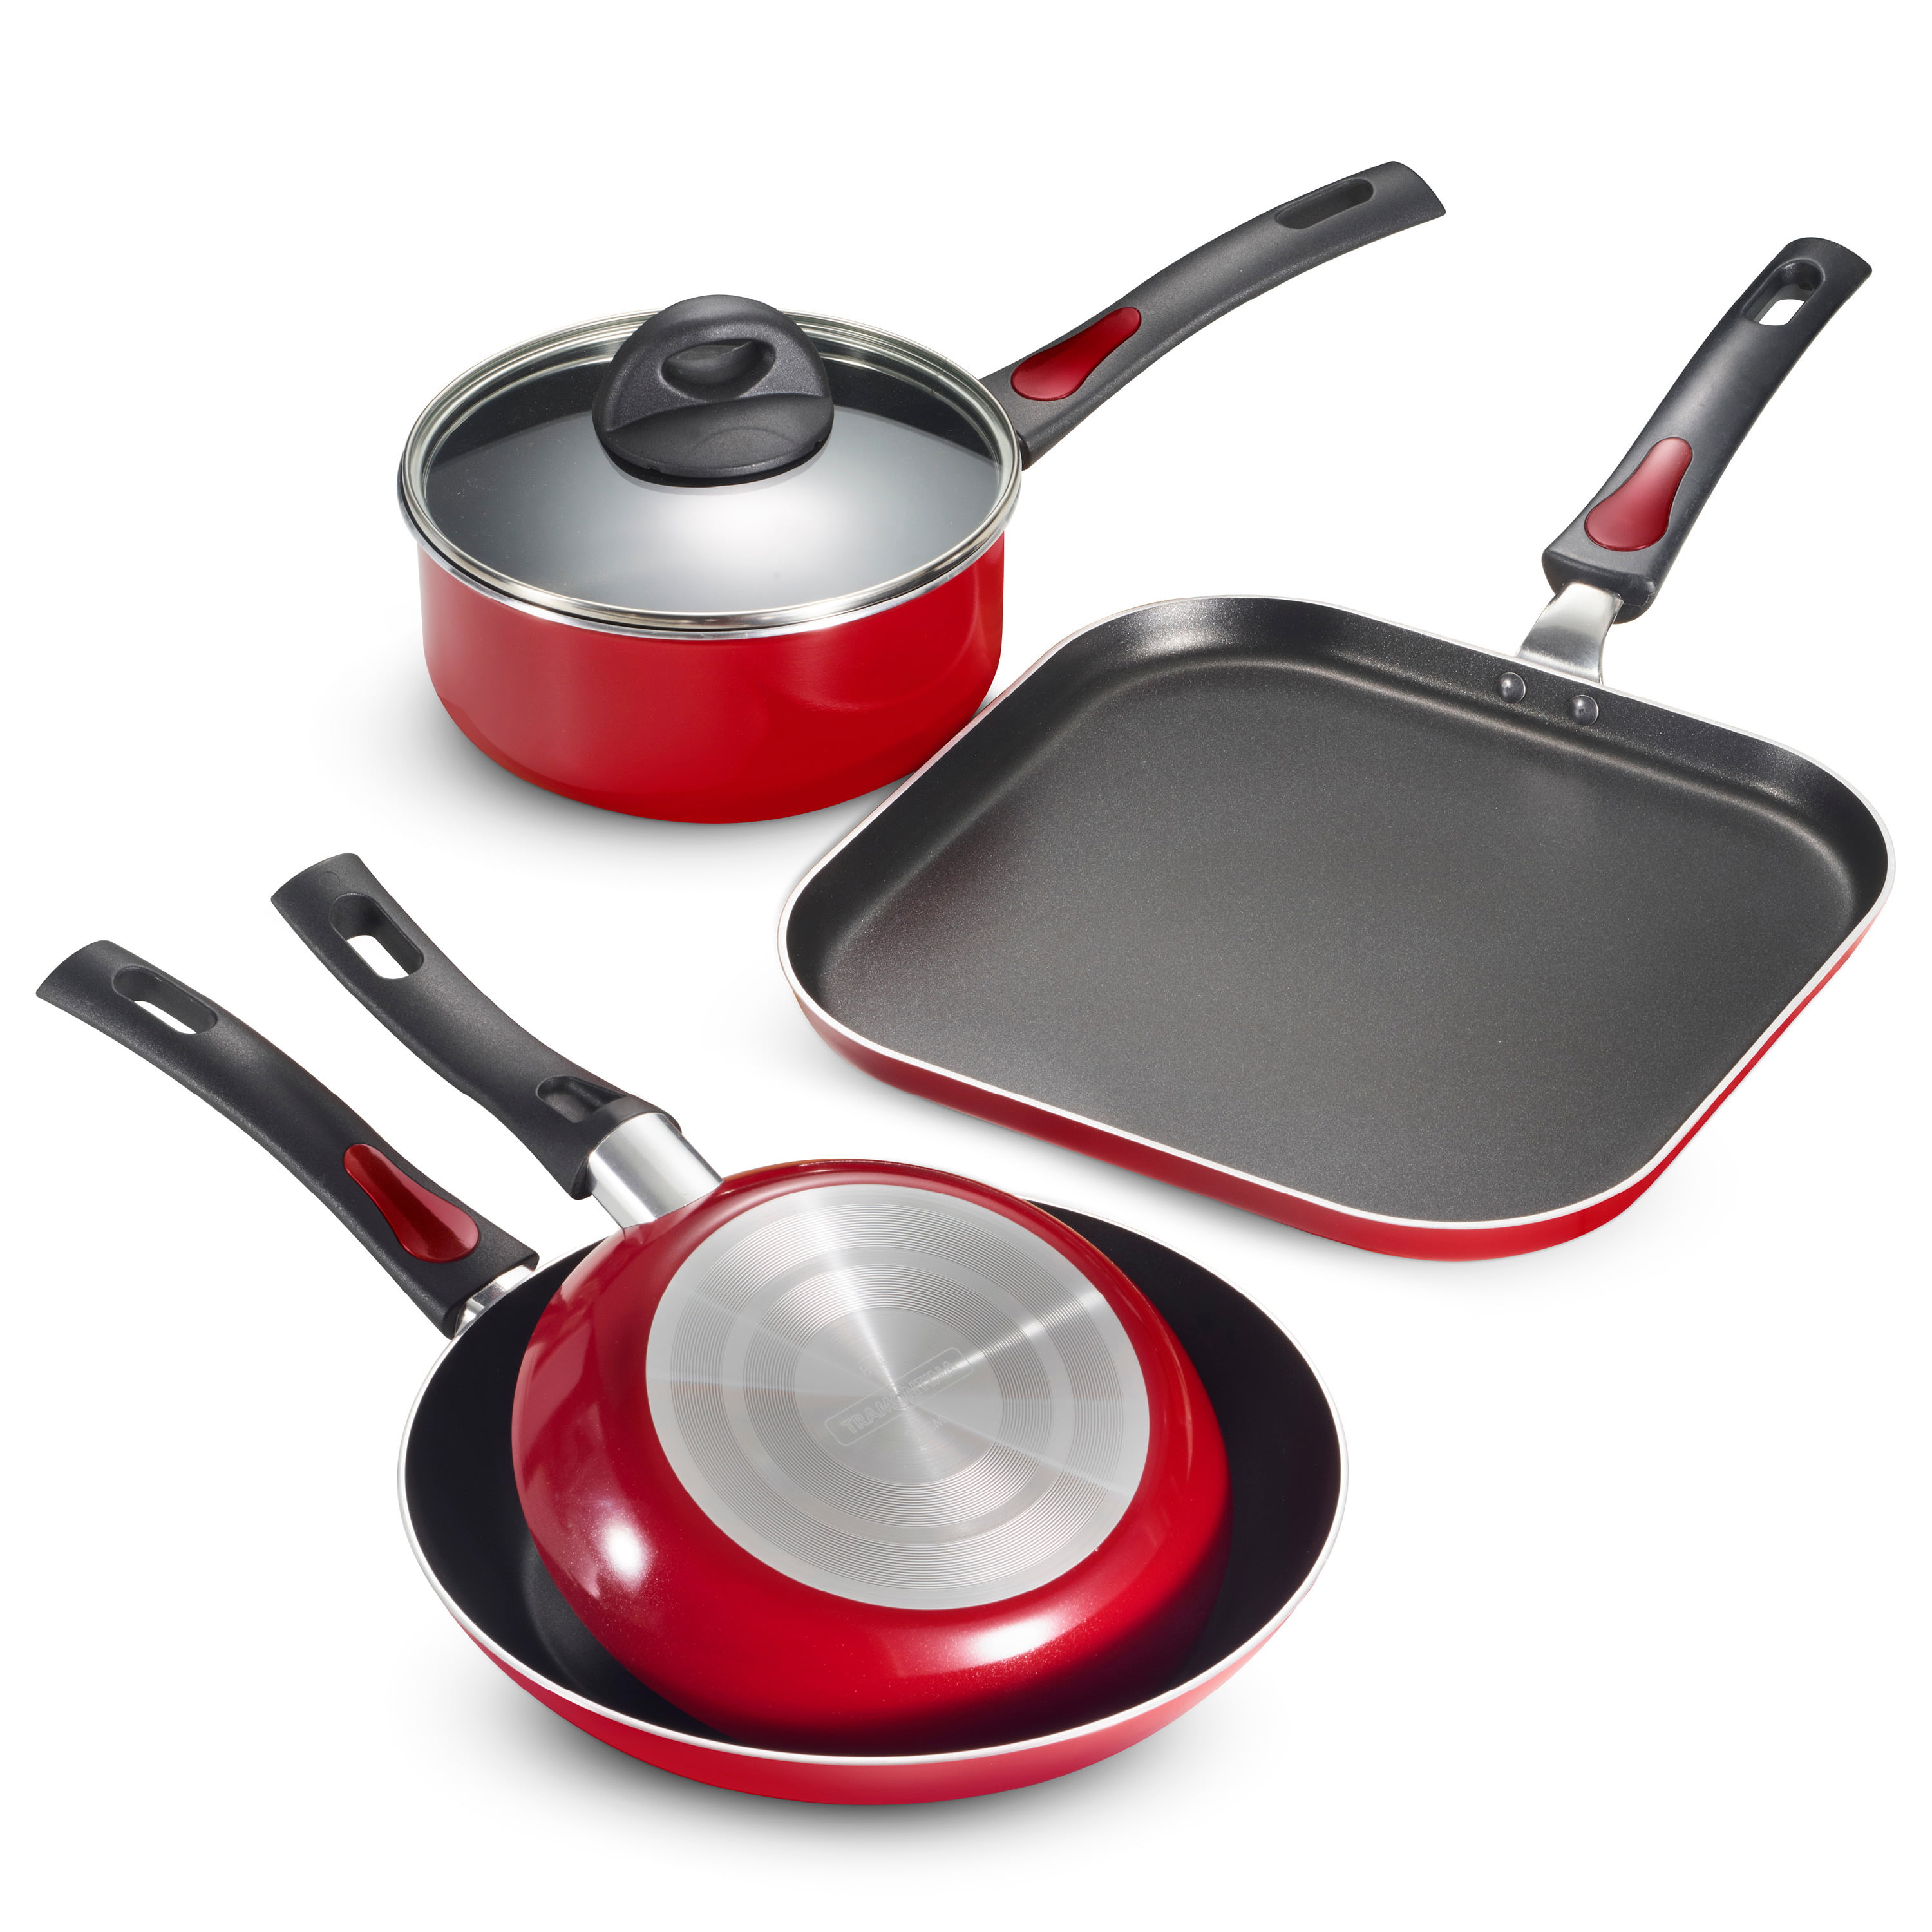 Dropship Tramontina EveryDay 5 Qt Aluminum Nonstick Covered Jumbo Cooker  Red to Sell Online at a Lower Price